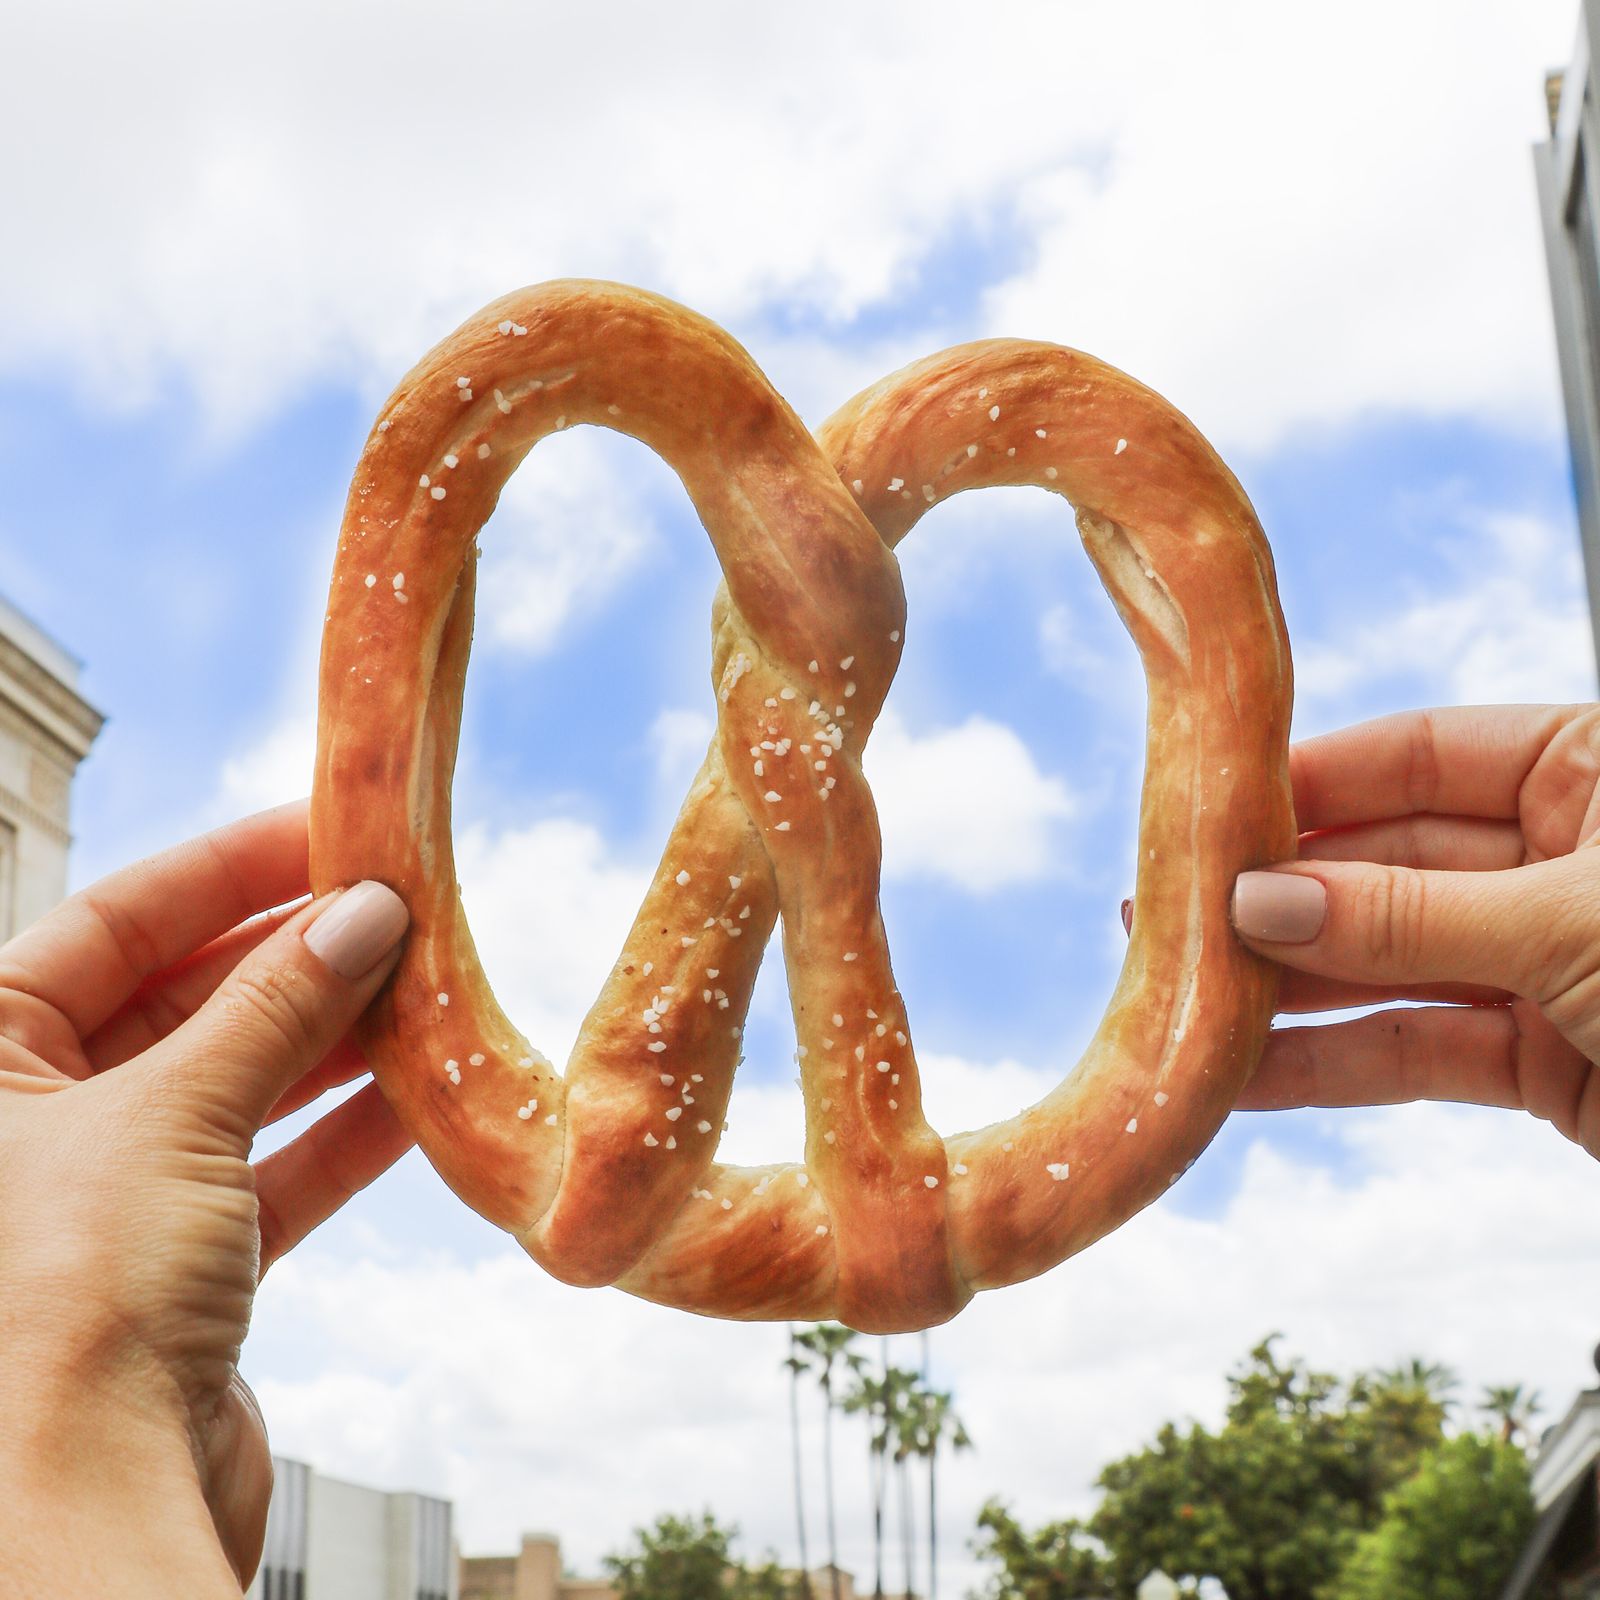 Knot Your Average Opening: Wetzel's Pretzels Makes 400th Location Debut on Hollywood Blvd.